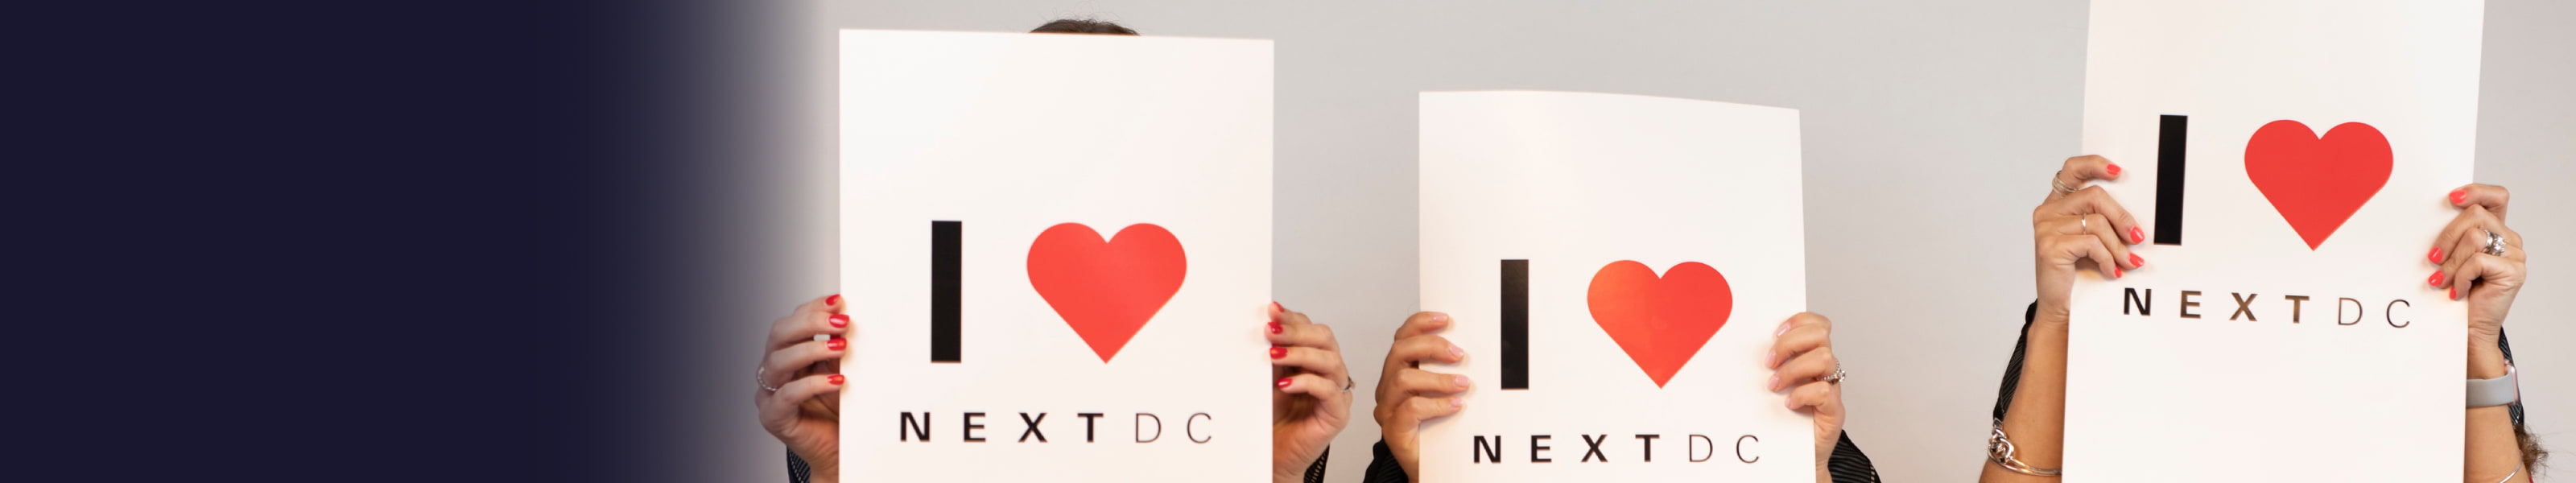 NEXTDC proves the power of giving, launching its new corporate social responsibility program